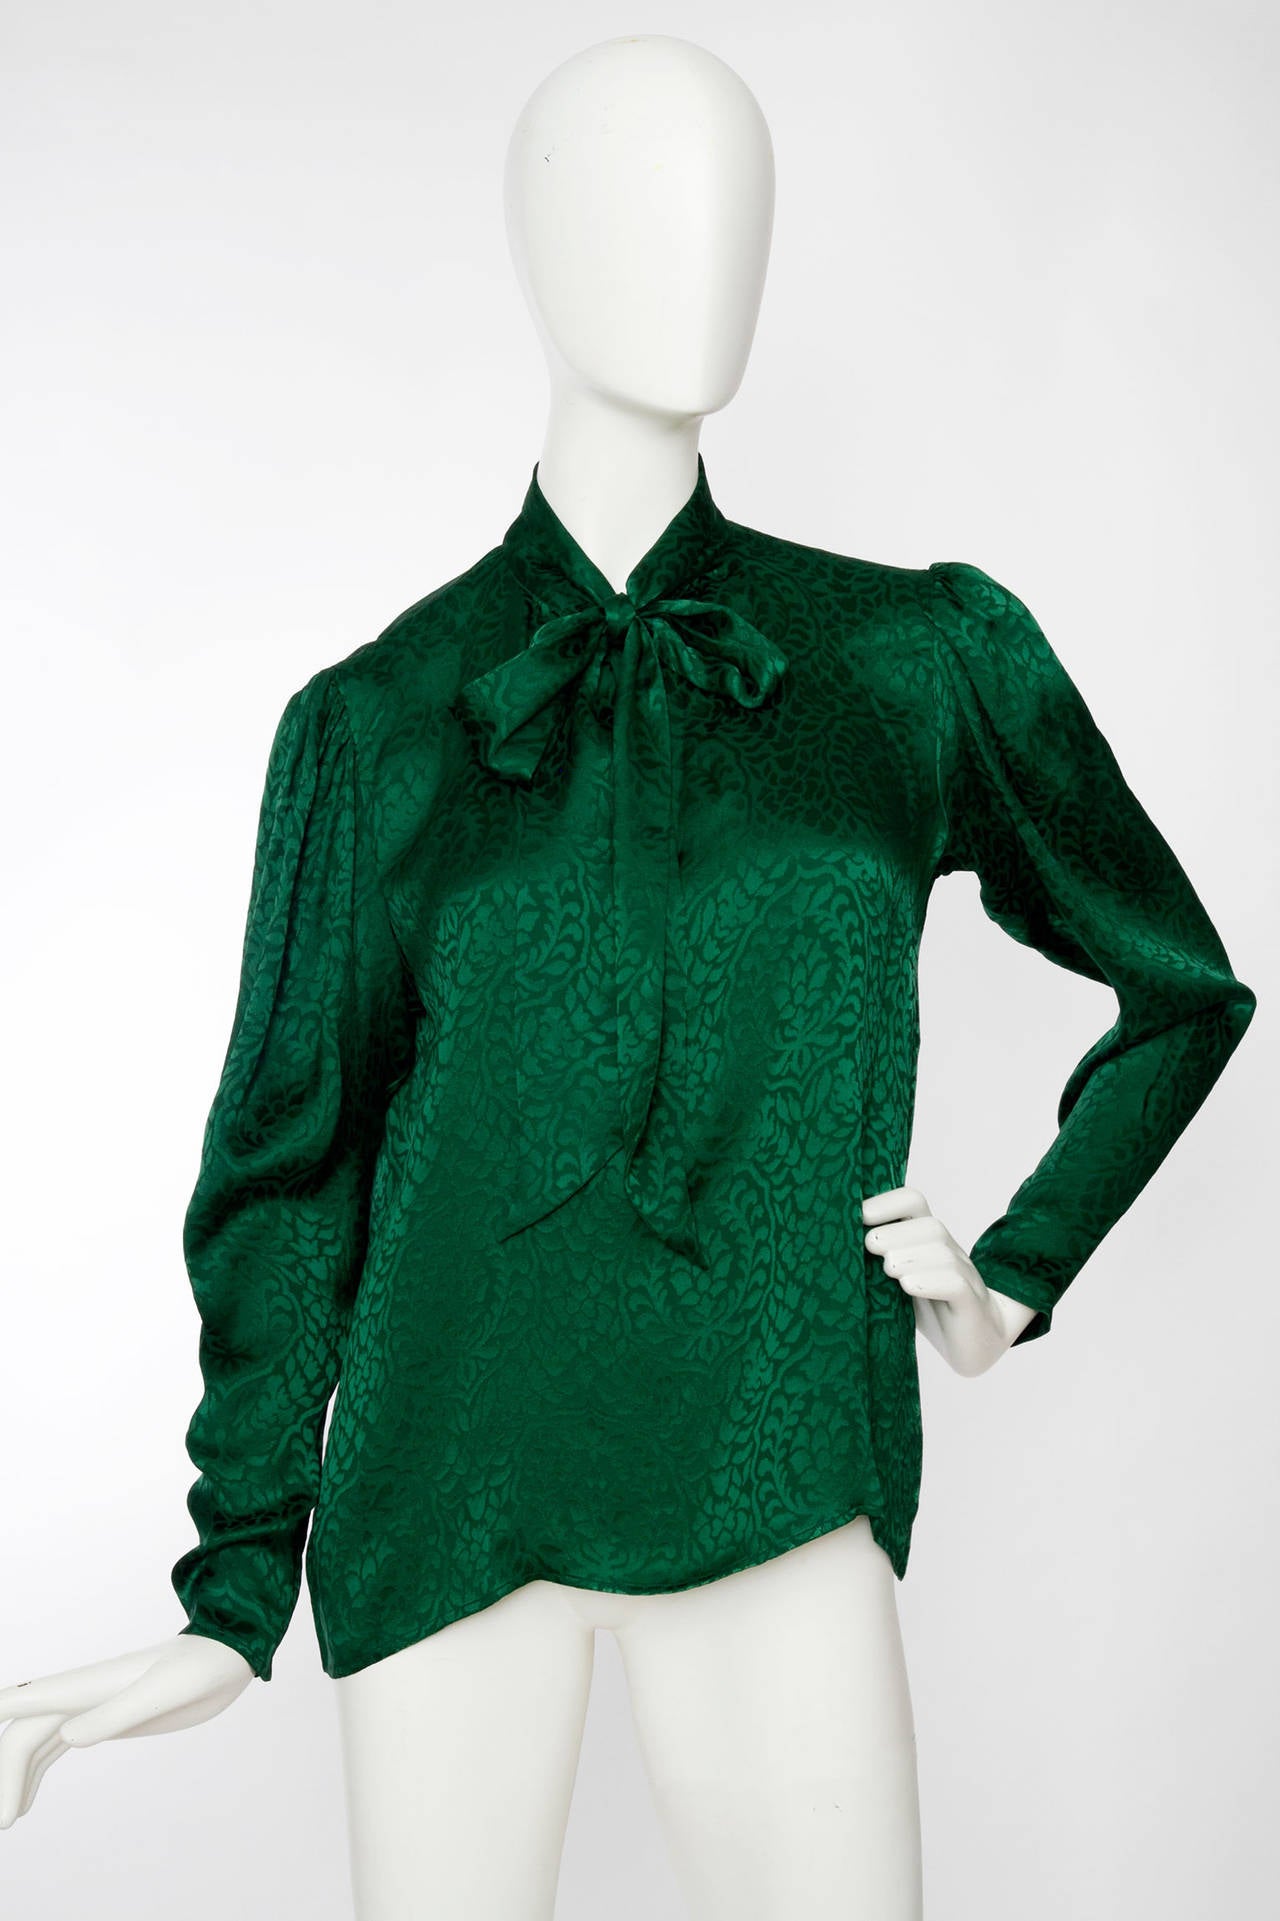 A lovely 1980s Yves Saint Laurent emerald green silk blouse with an allover paisley jacquard weave and bow detail around the neckline. The blouse has long tapered sleeves with a slight puffed shoulder and three buttoned cuffs. The blouse has a